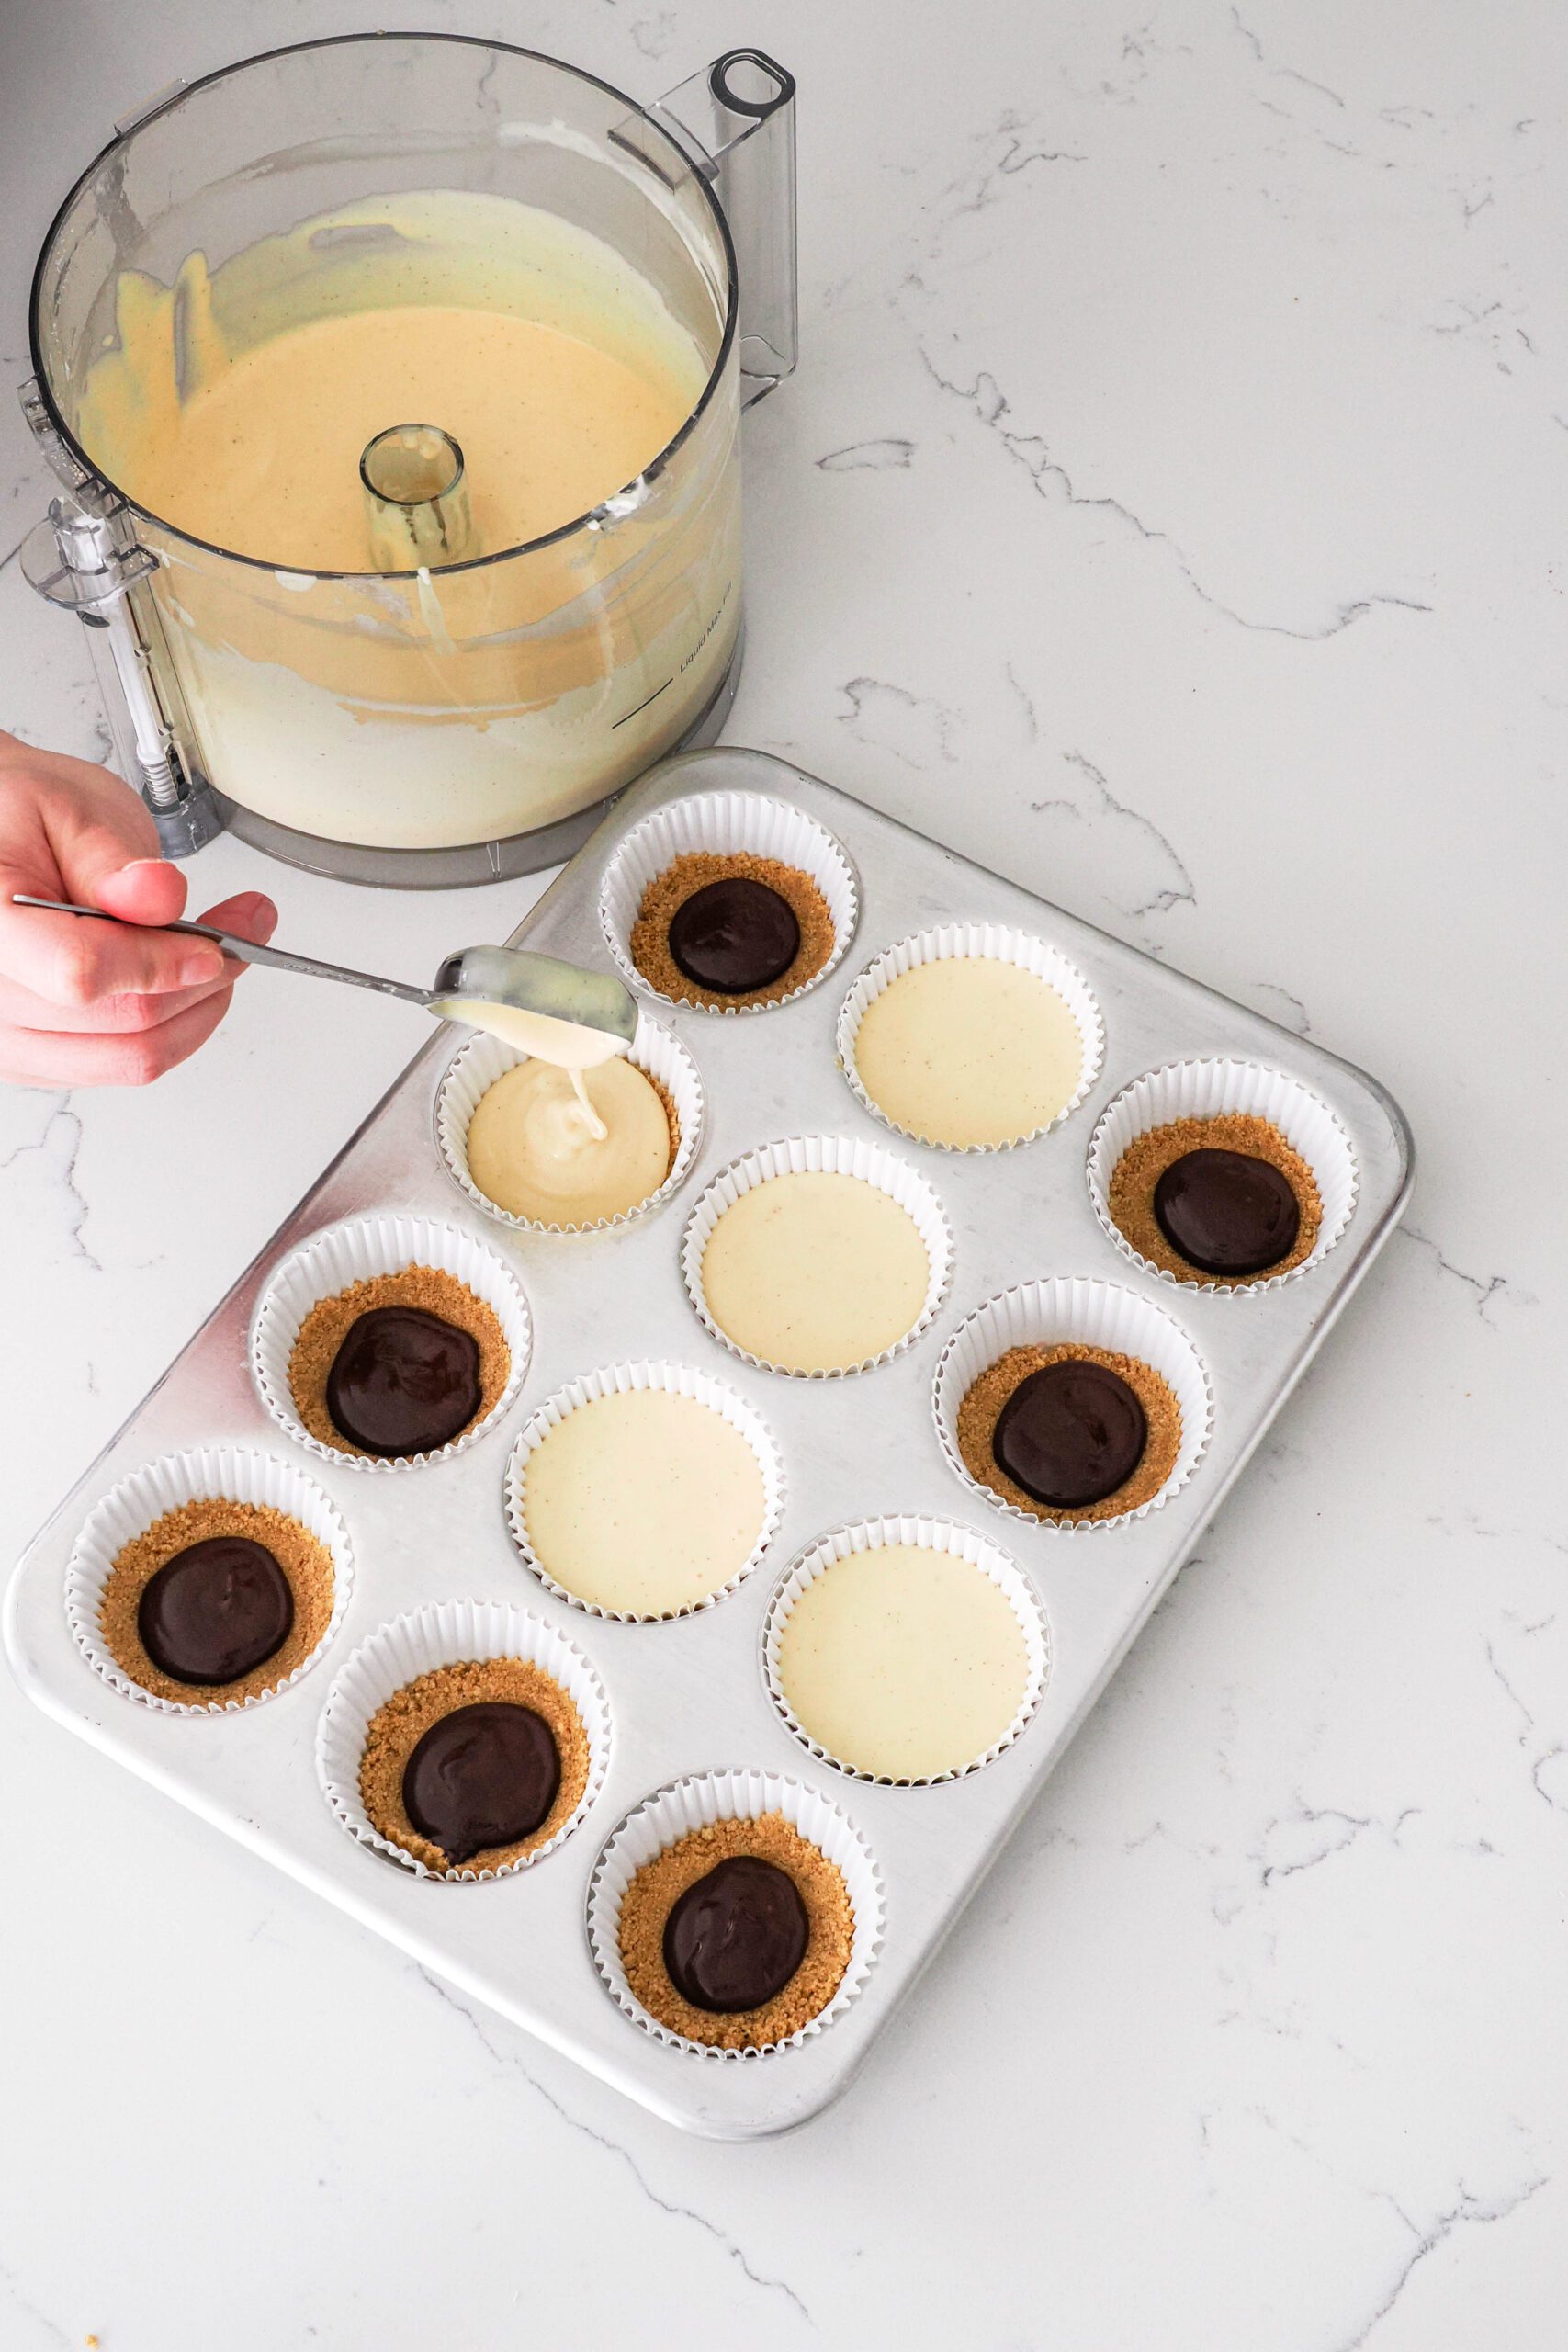 A hand drops a Tablespoon of cheesecake filling into muffin liners at a time.